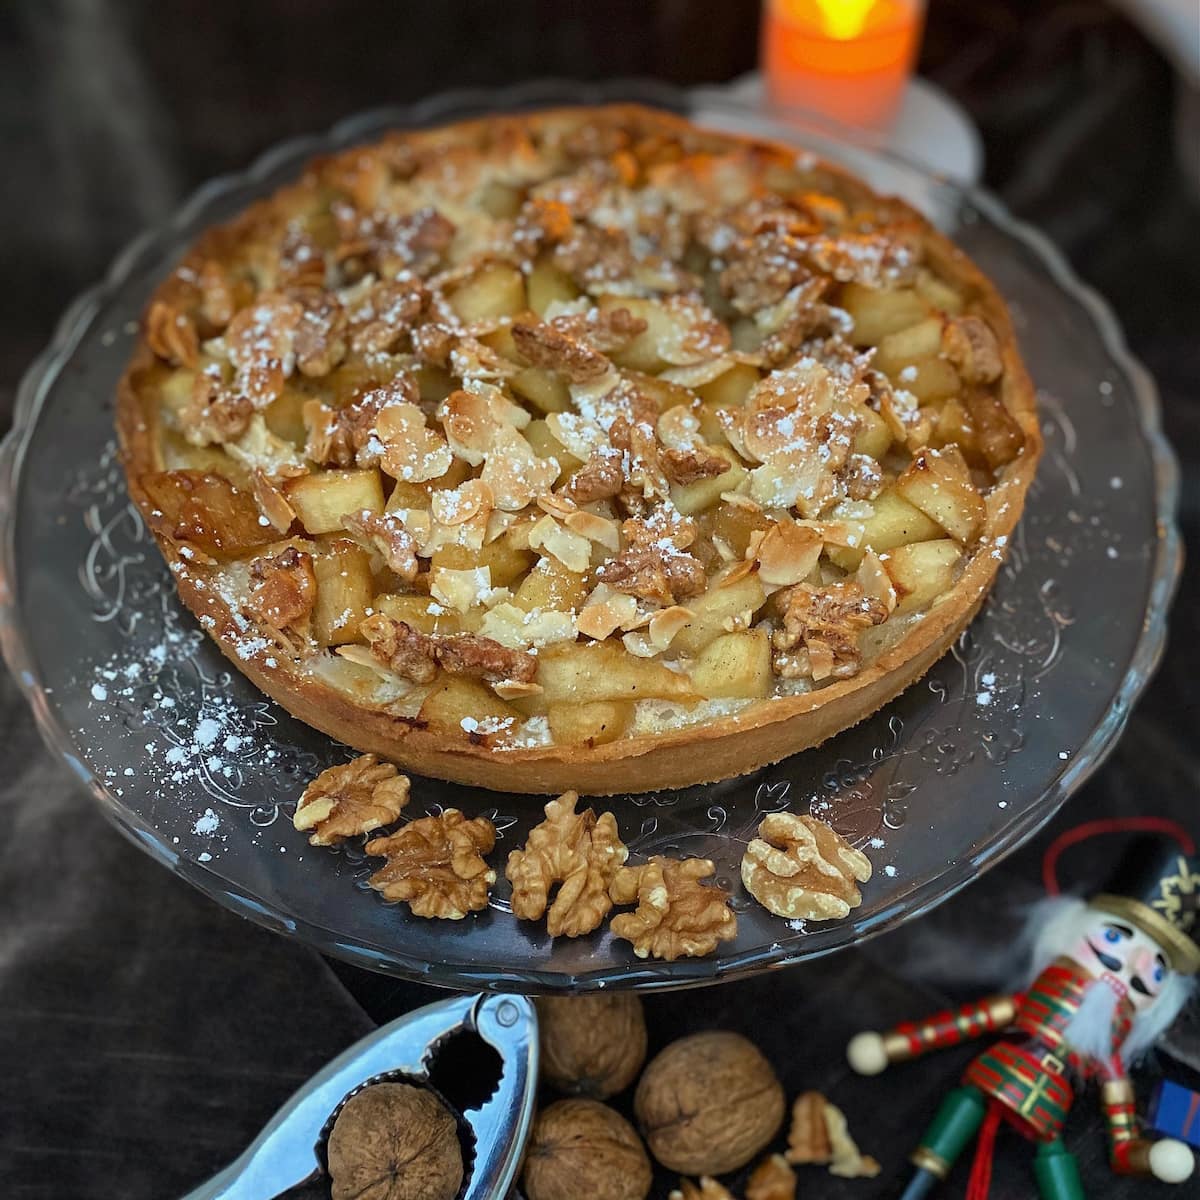 apple tart with toasted nuts on glass plate and cracking walnuts with a nutcracker doll